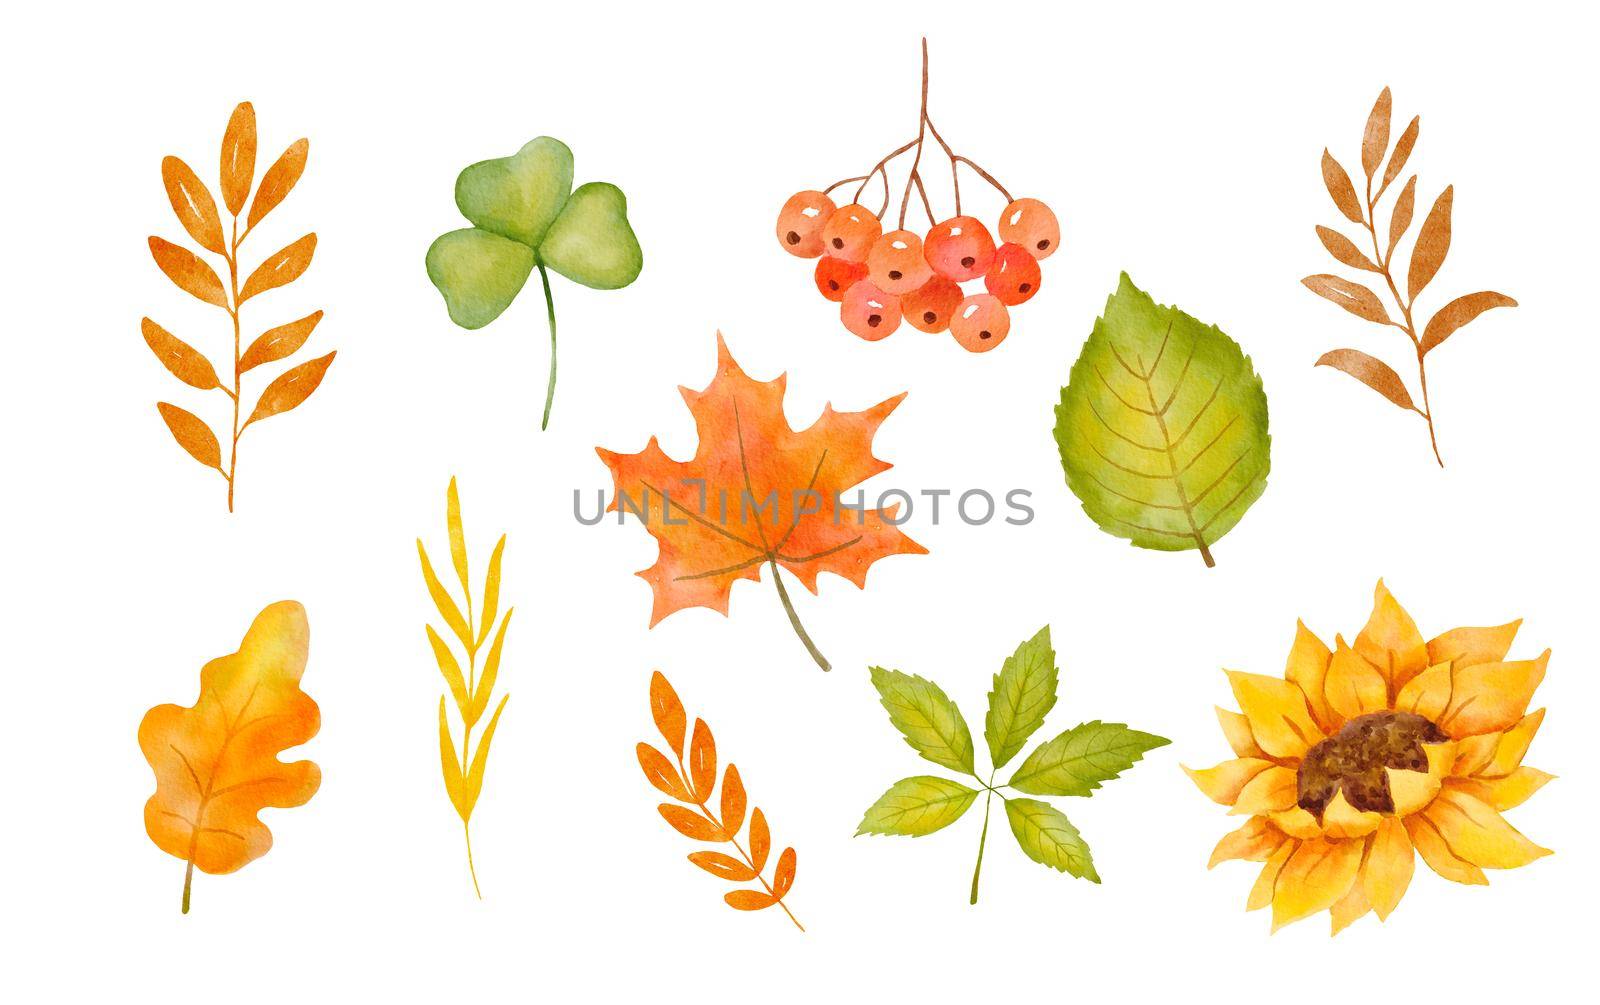 Watercolor sunflower and autumn tree leaves. Colorful botanical hand drawn fall illustration isolated on white